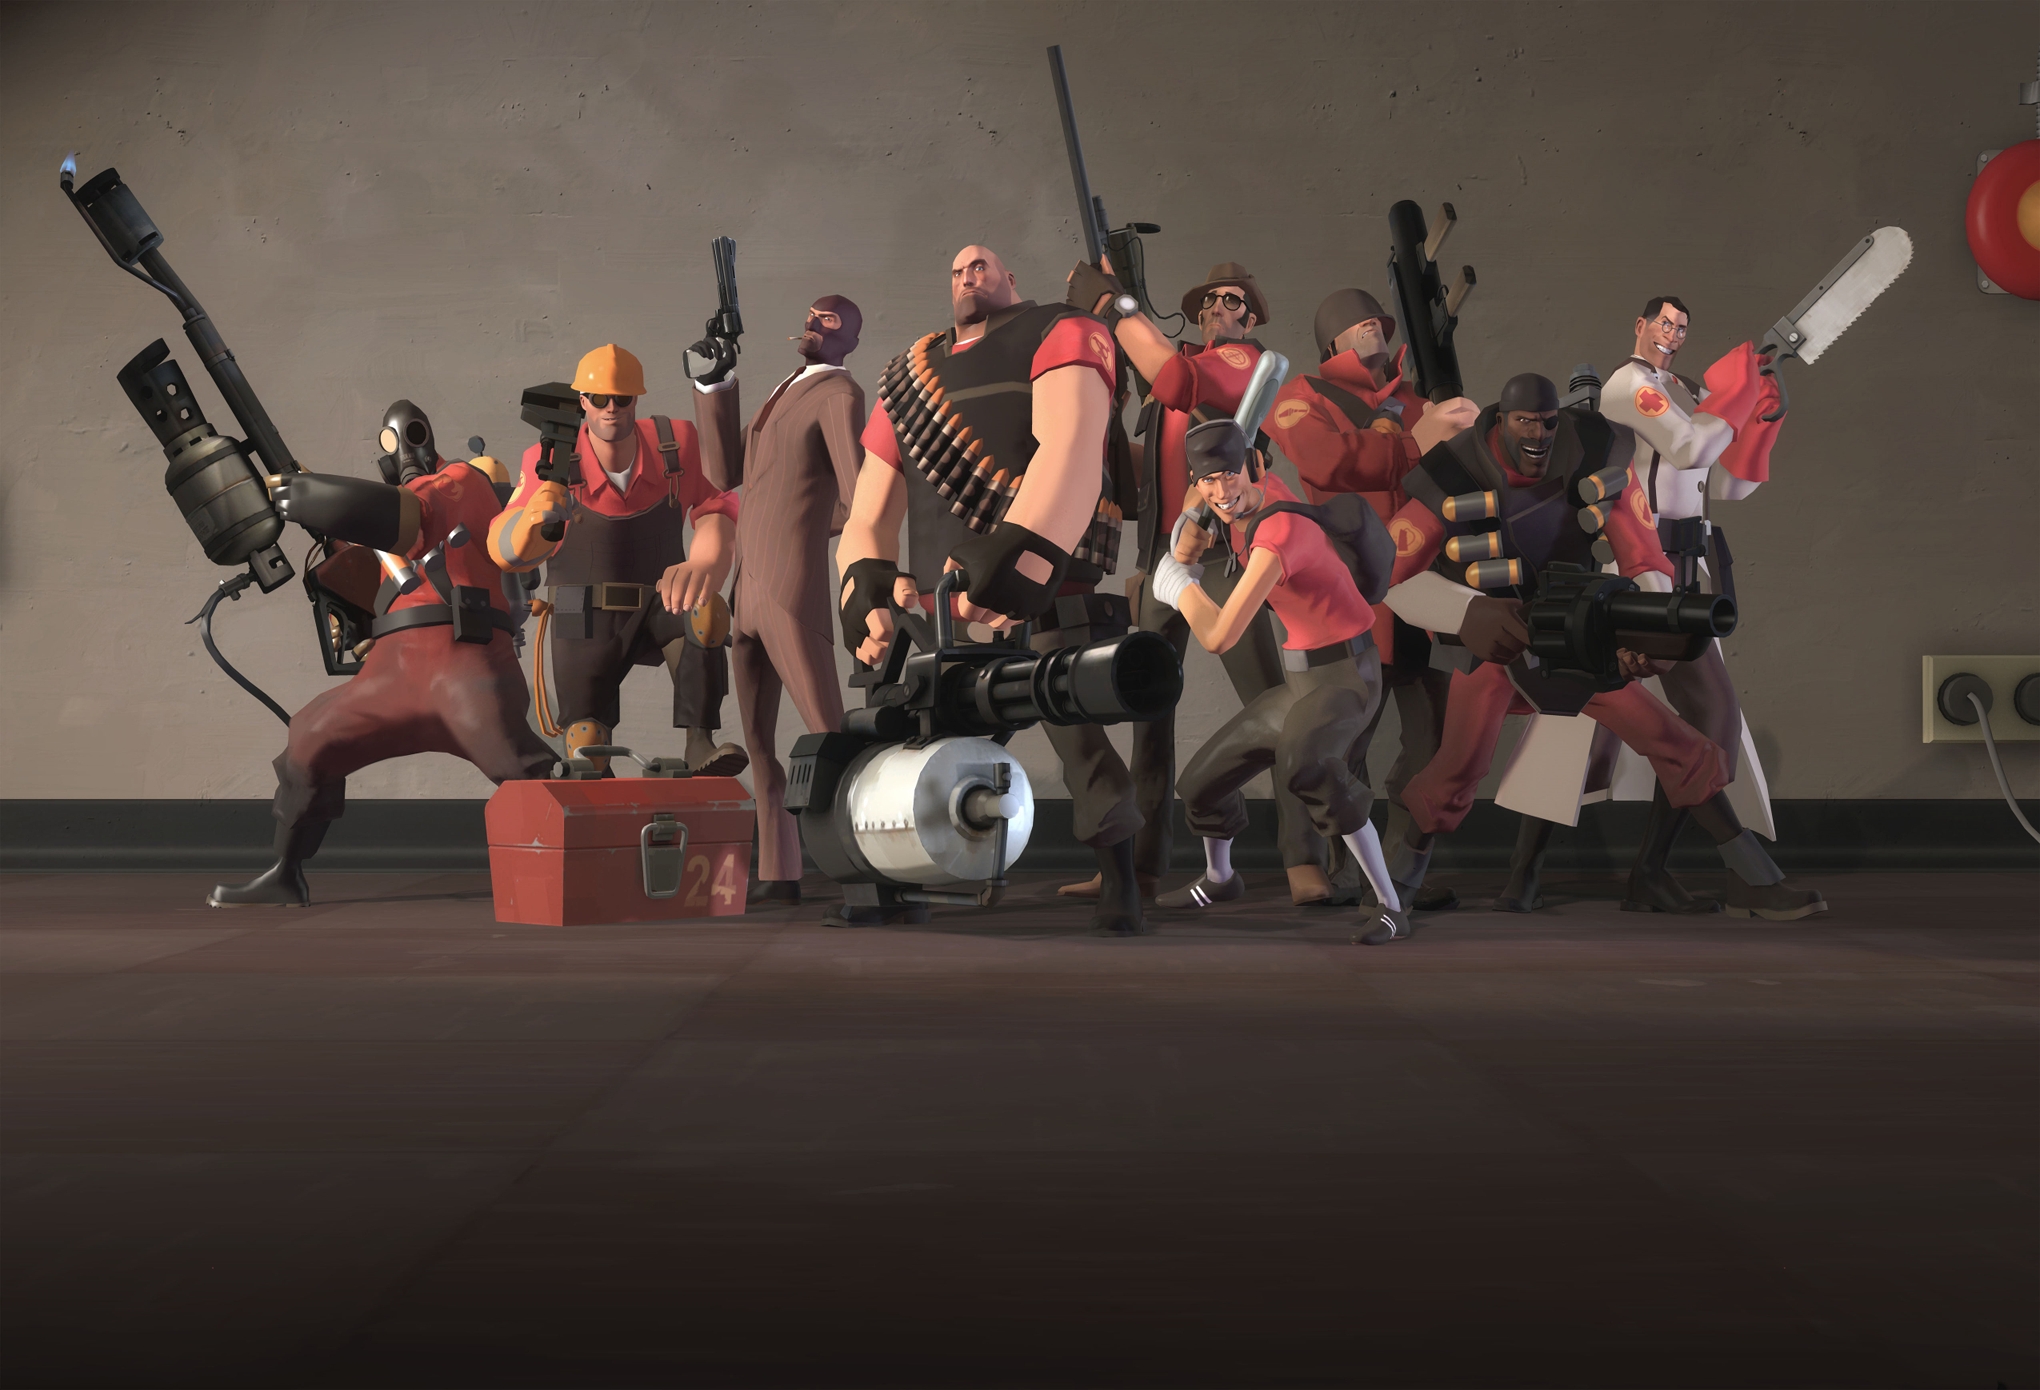 Team+fortress+3+crafting